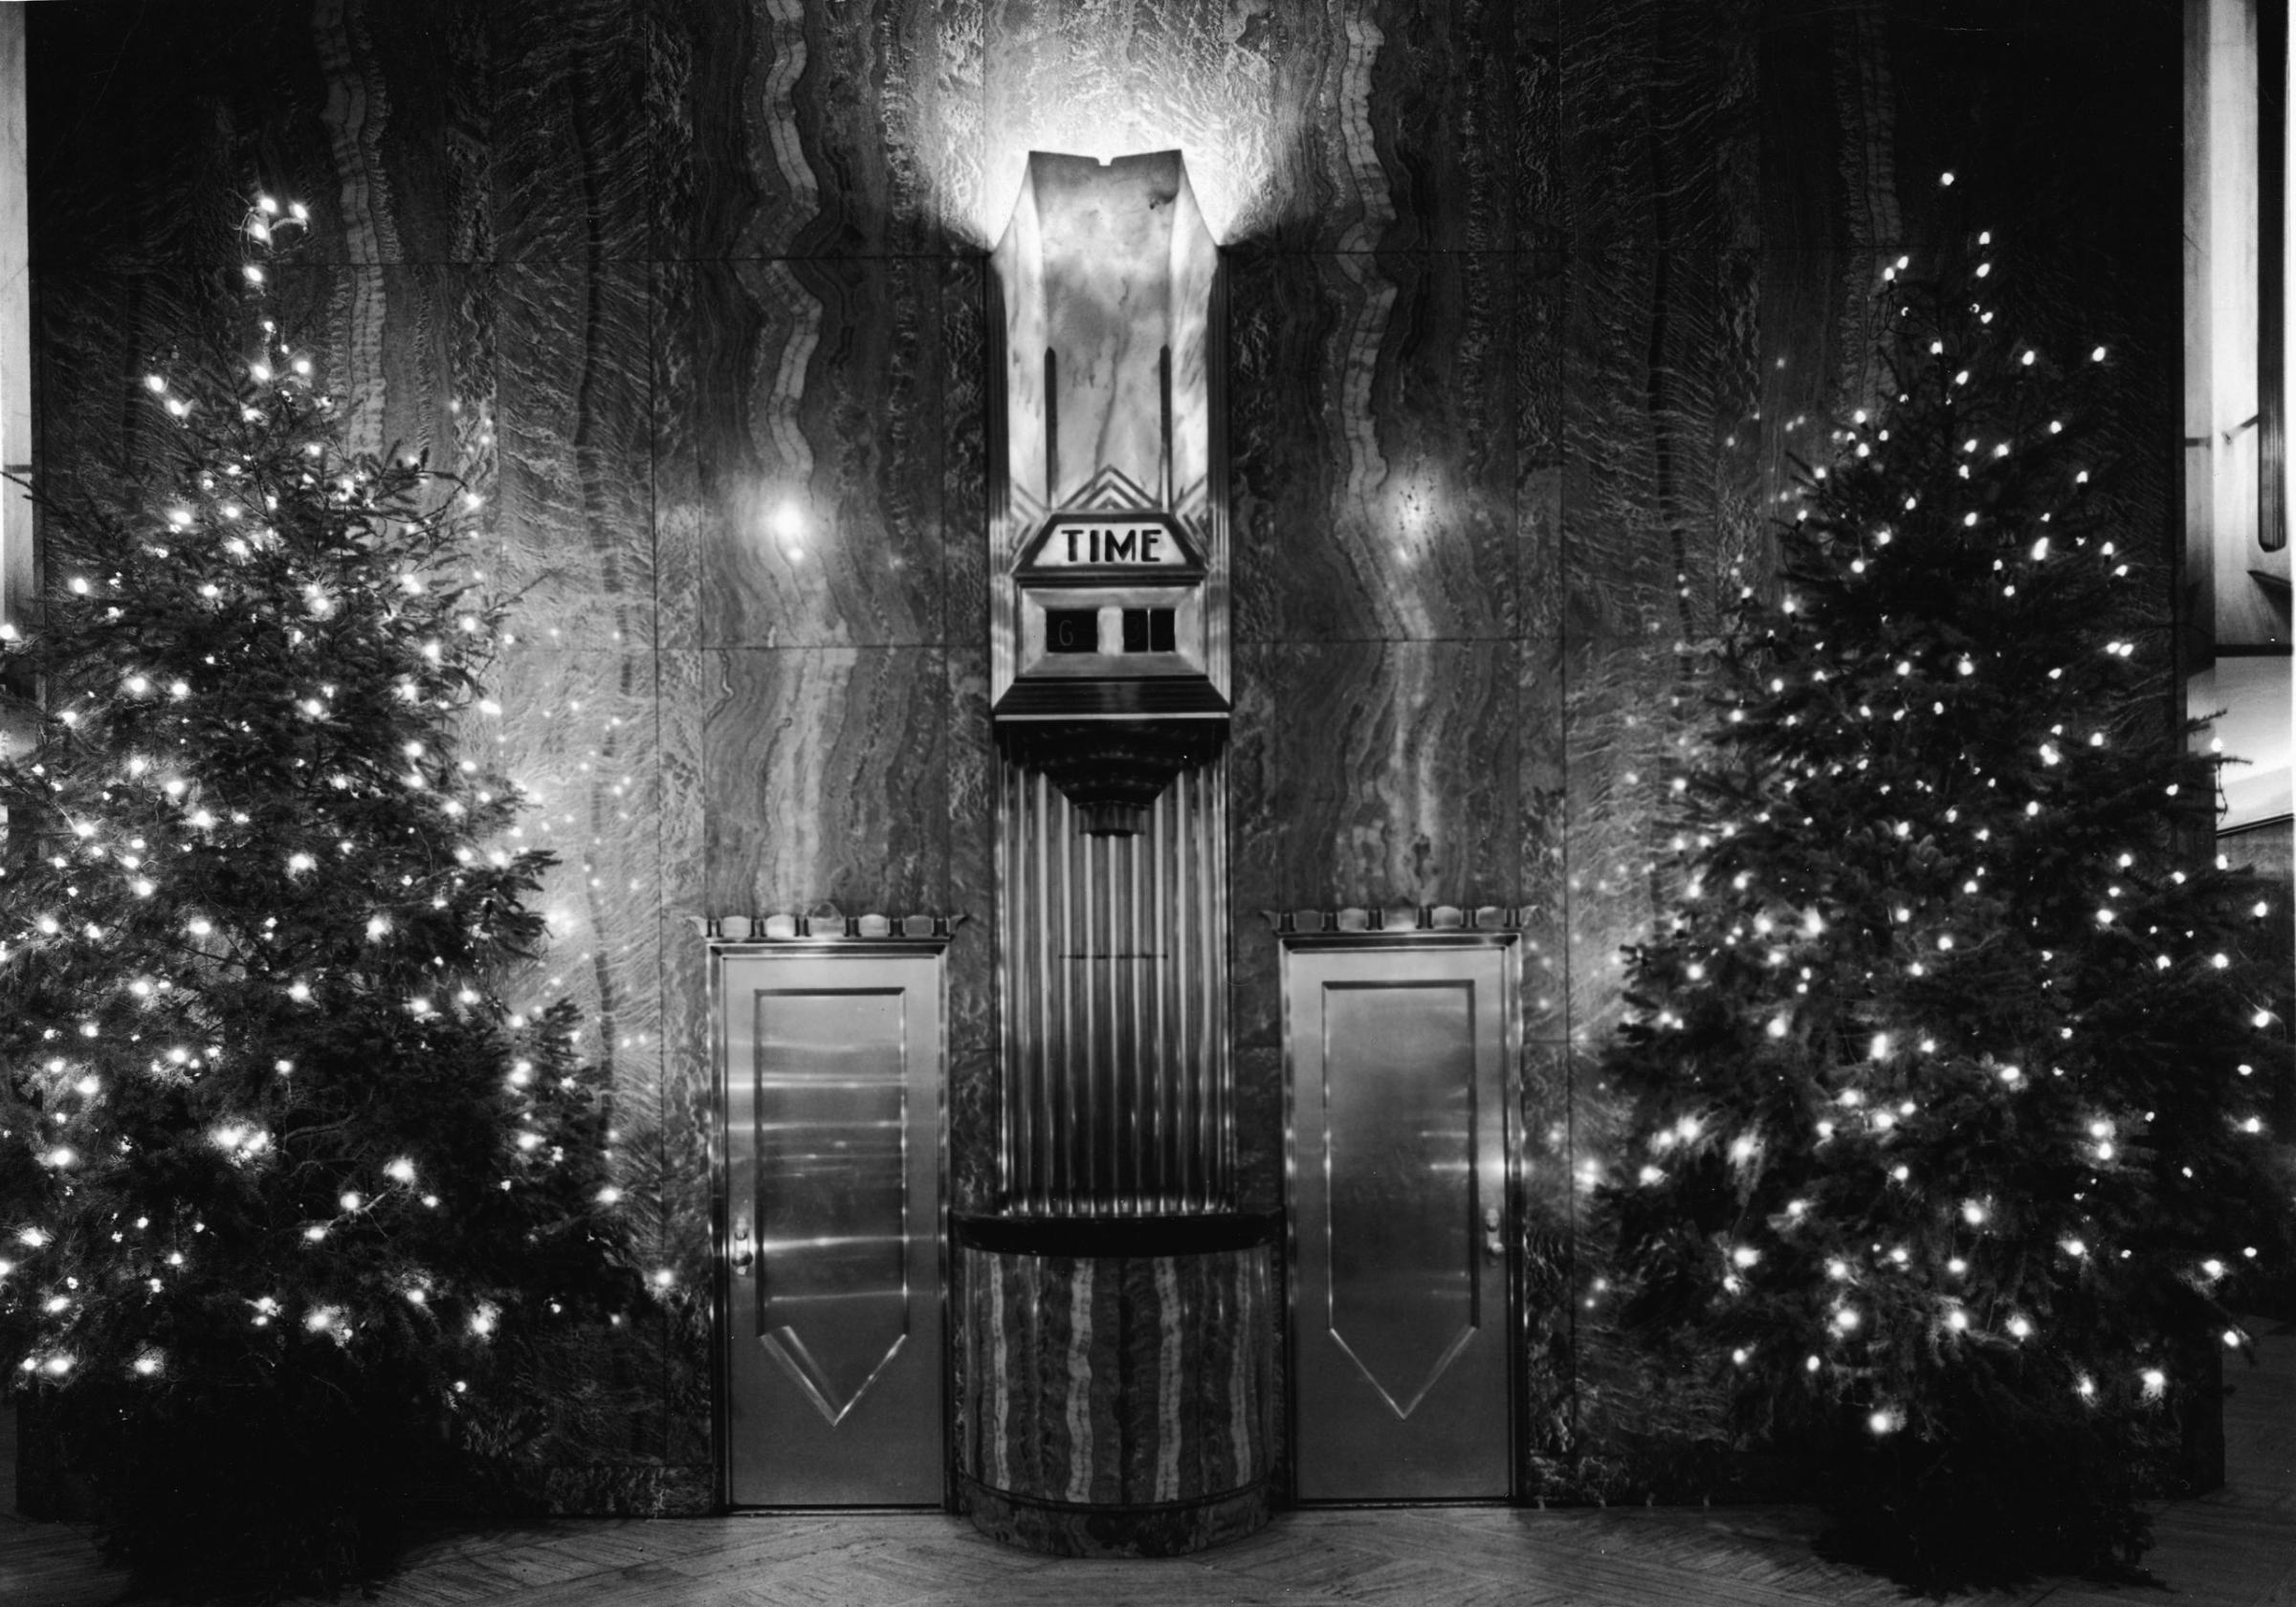 The lobby of the Chrysler Building (1930, William van Alen, architect) and its clock, two doors, and two Christmas trees with strings of light, the wall is red Moroccan marble, New York, mid 20th Century.